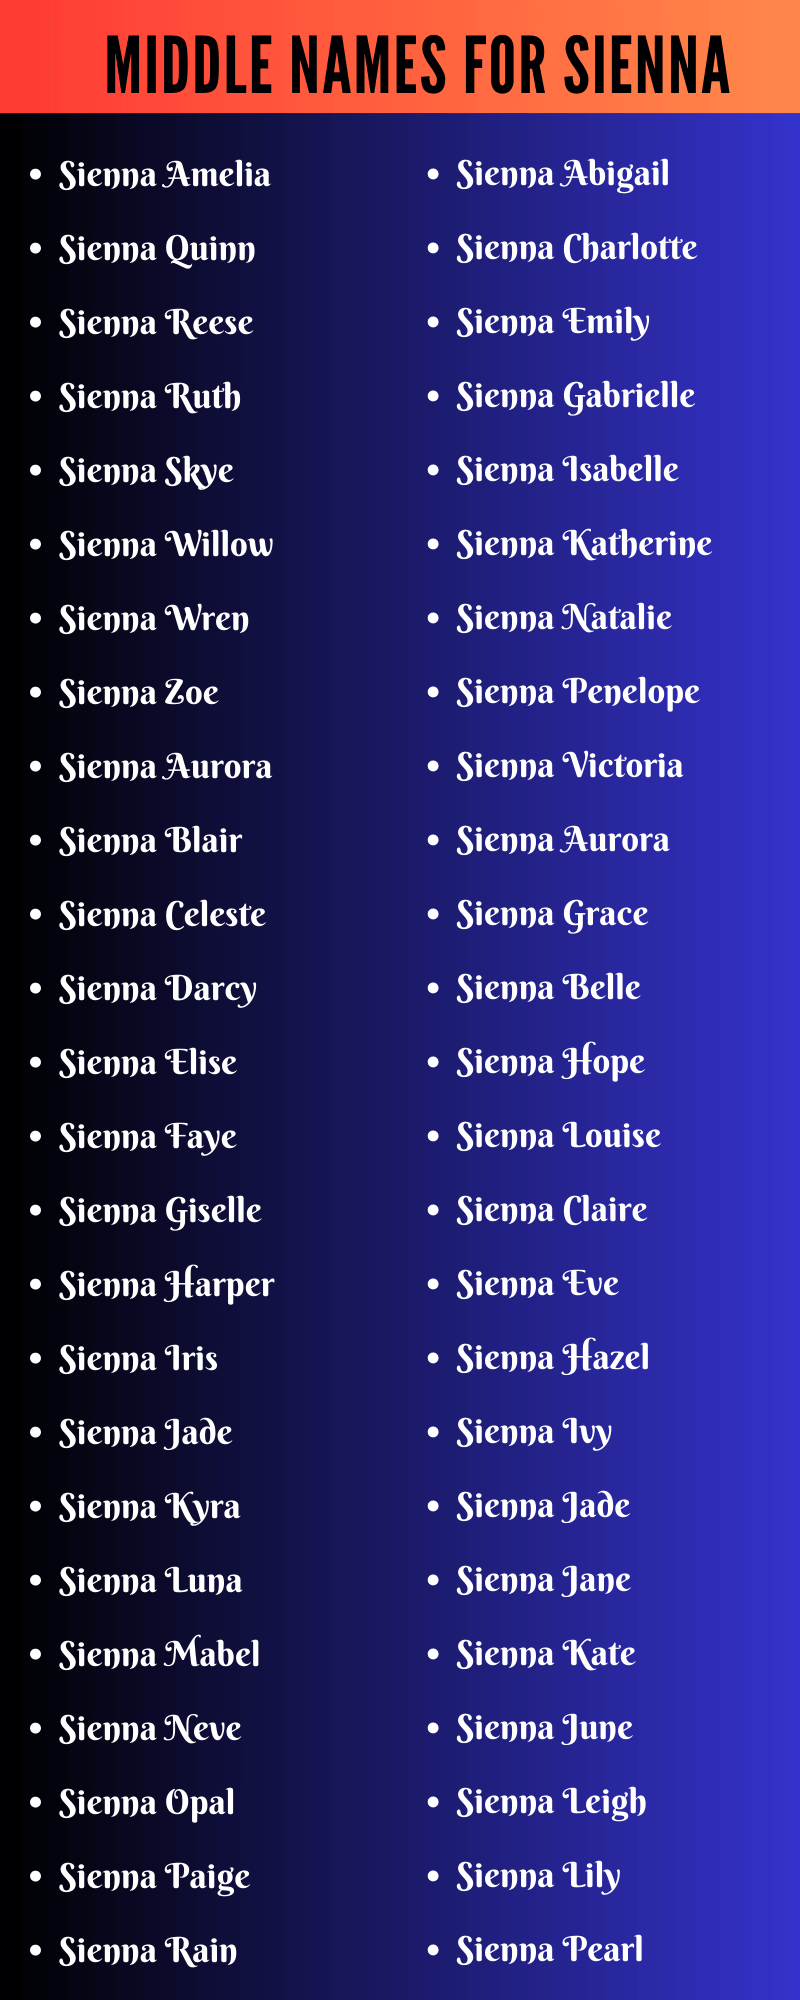 Middle Names For Sienna